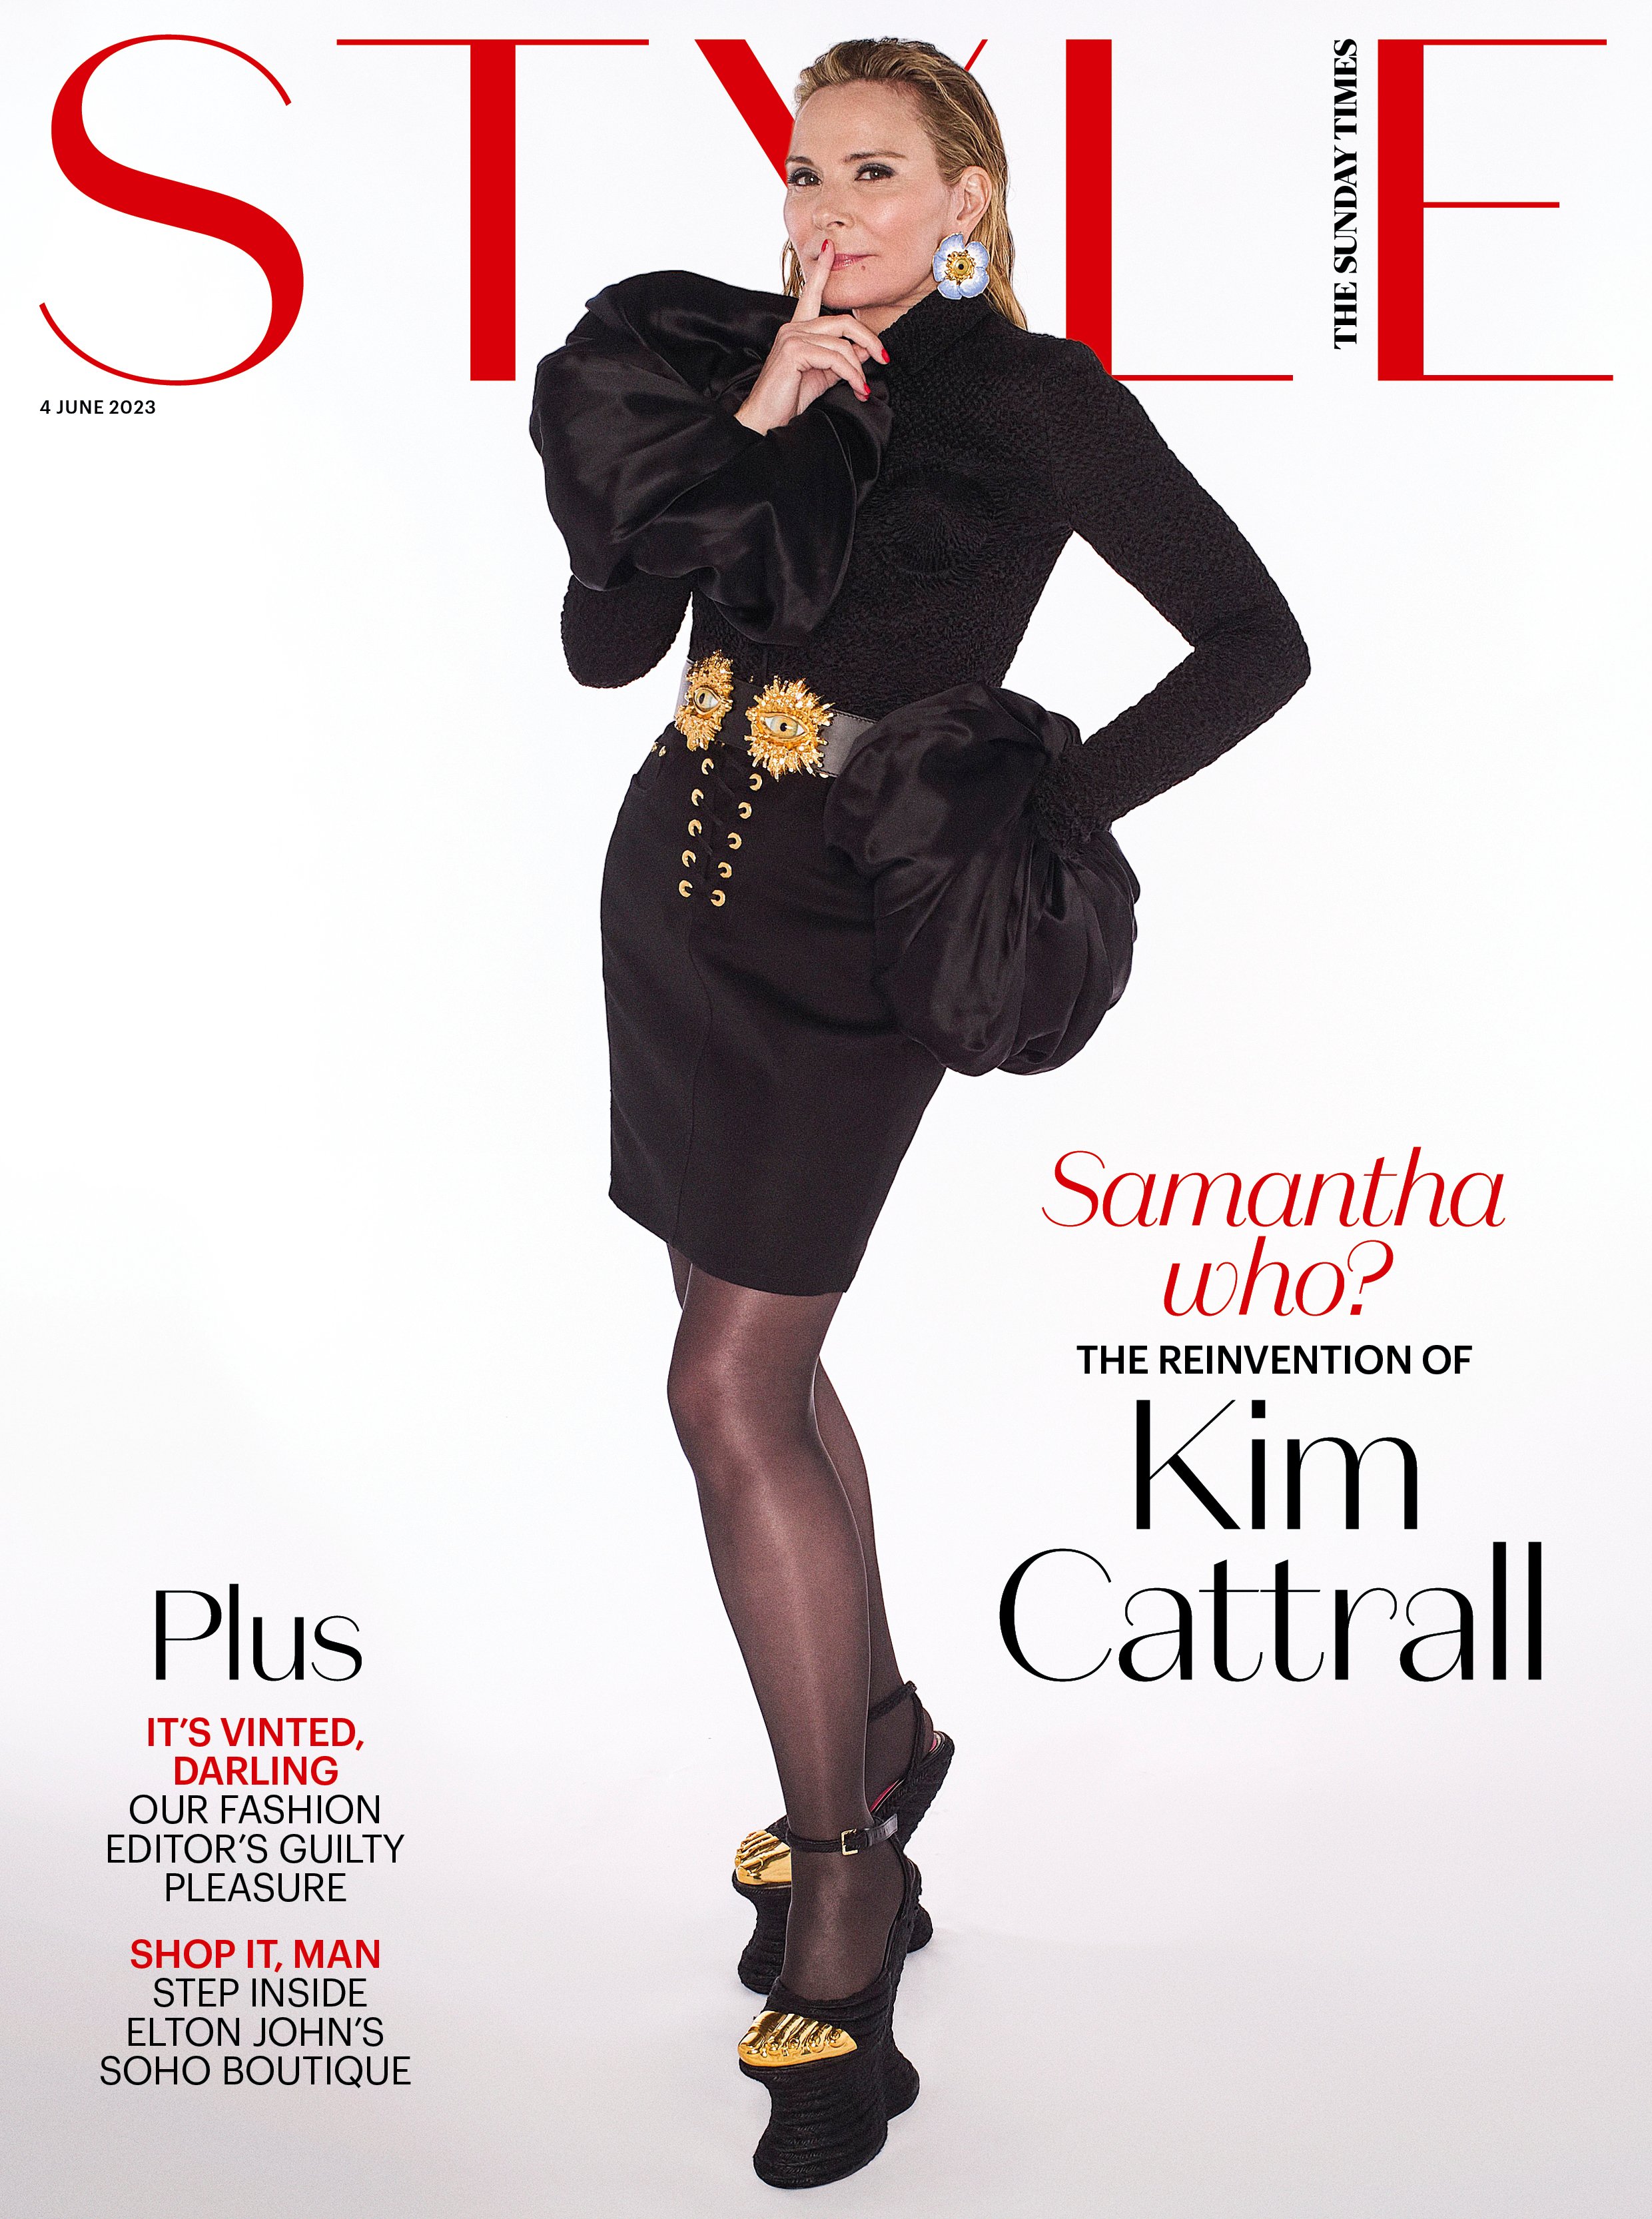 Kim Cattrall for the cover of The Sunday Times Style